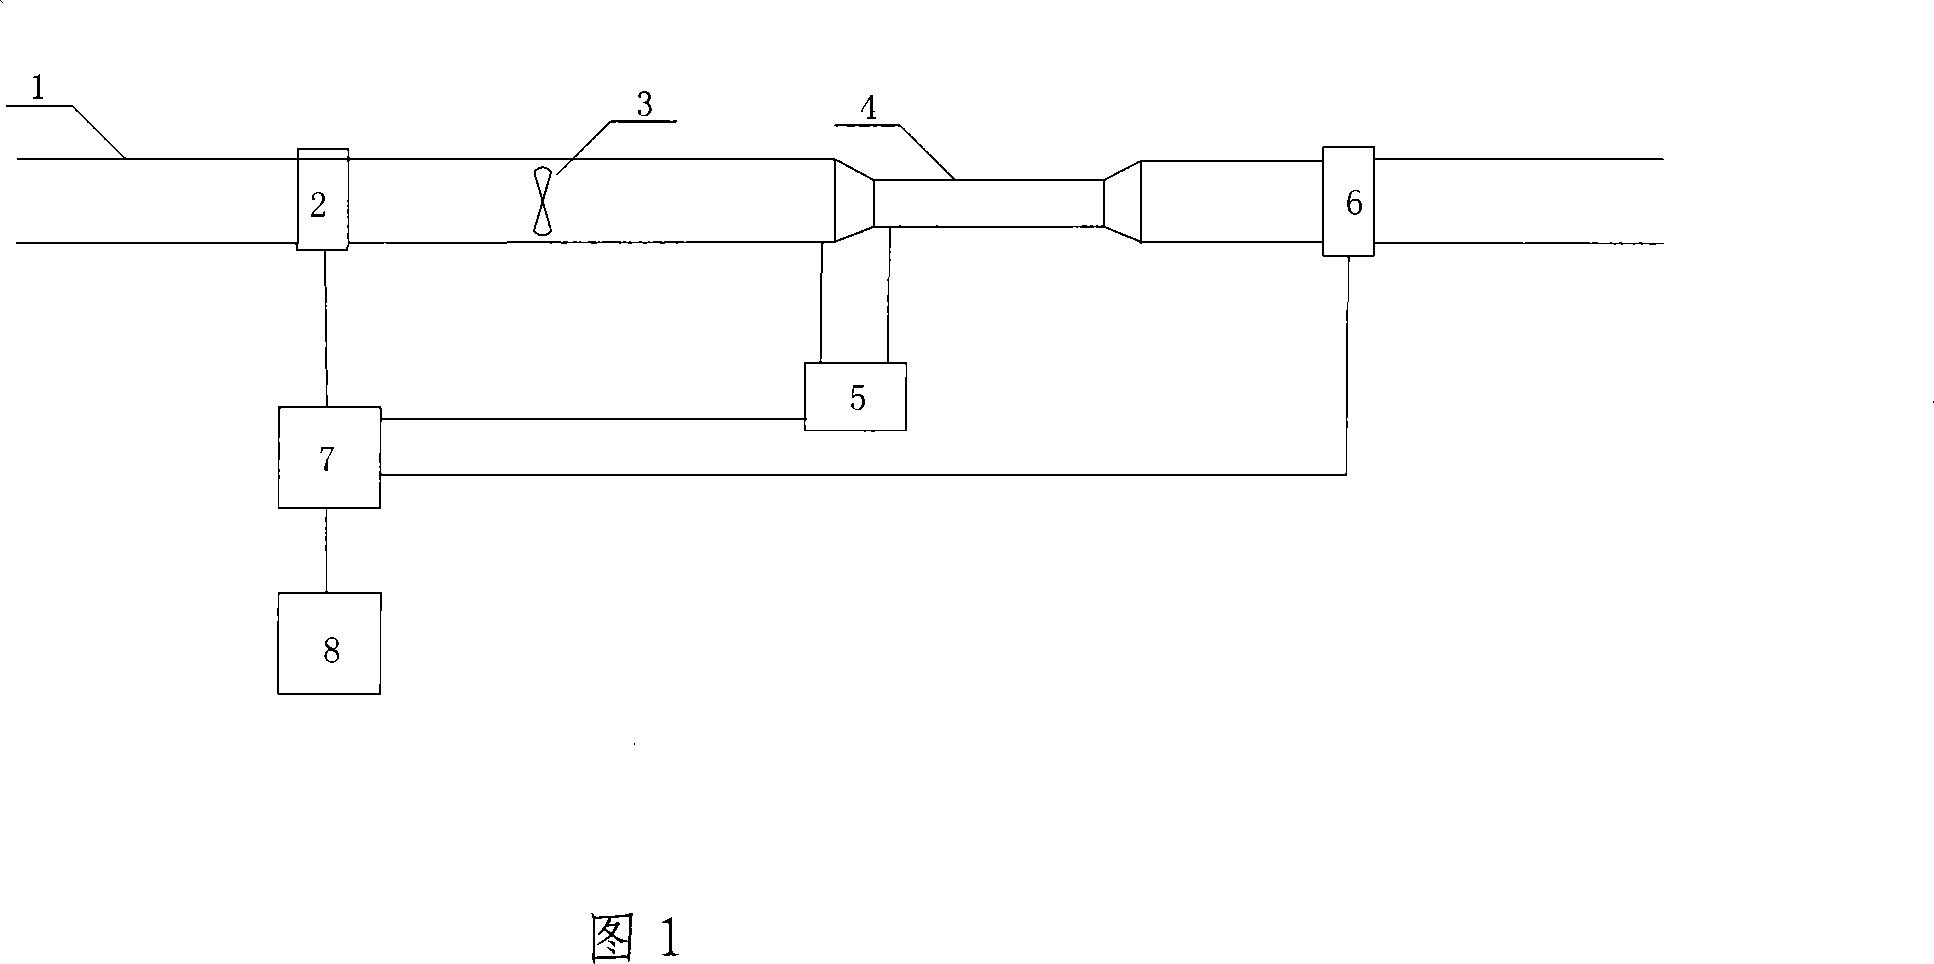 Low gas content gas-liquid two-phase flow measuring apparatus based on capacitance sensor and standard venturi tube